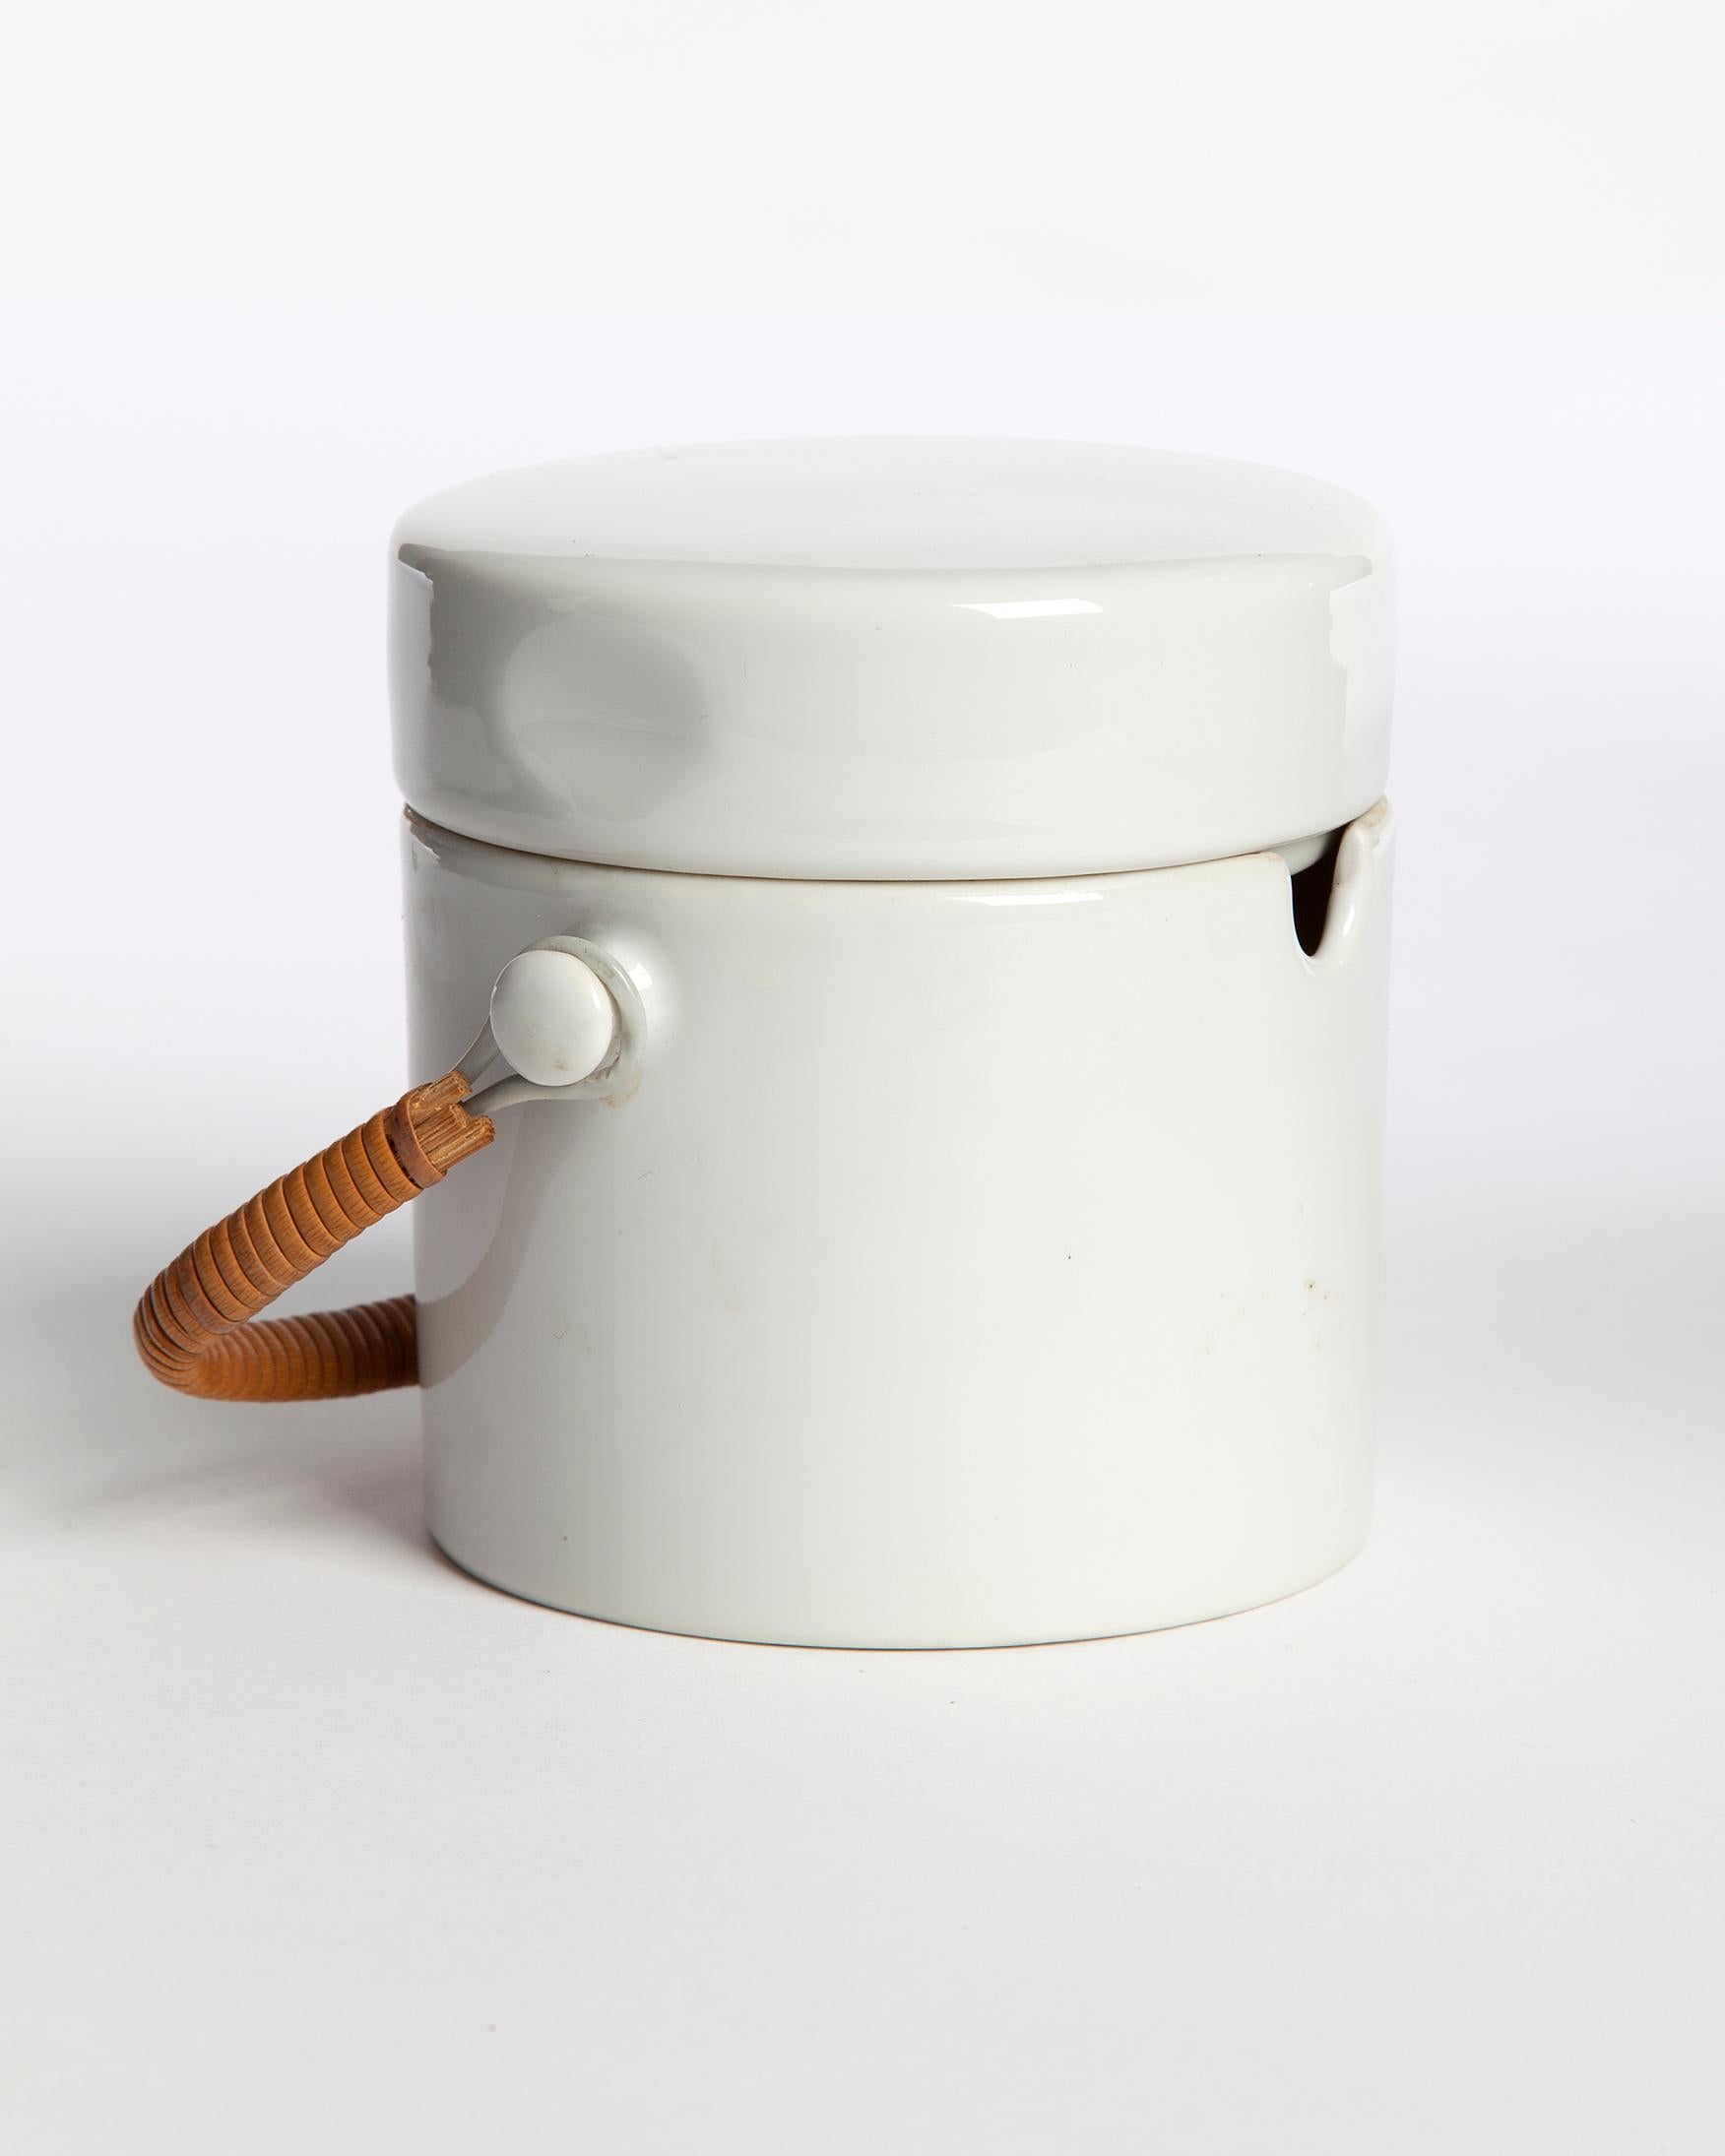 Porcelain sugar bowl with lid and cane handle from the 